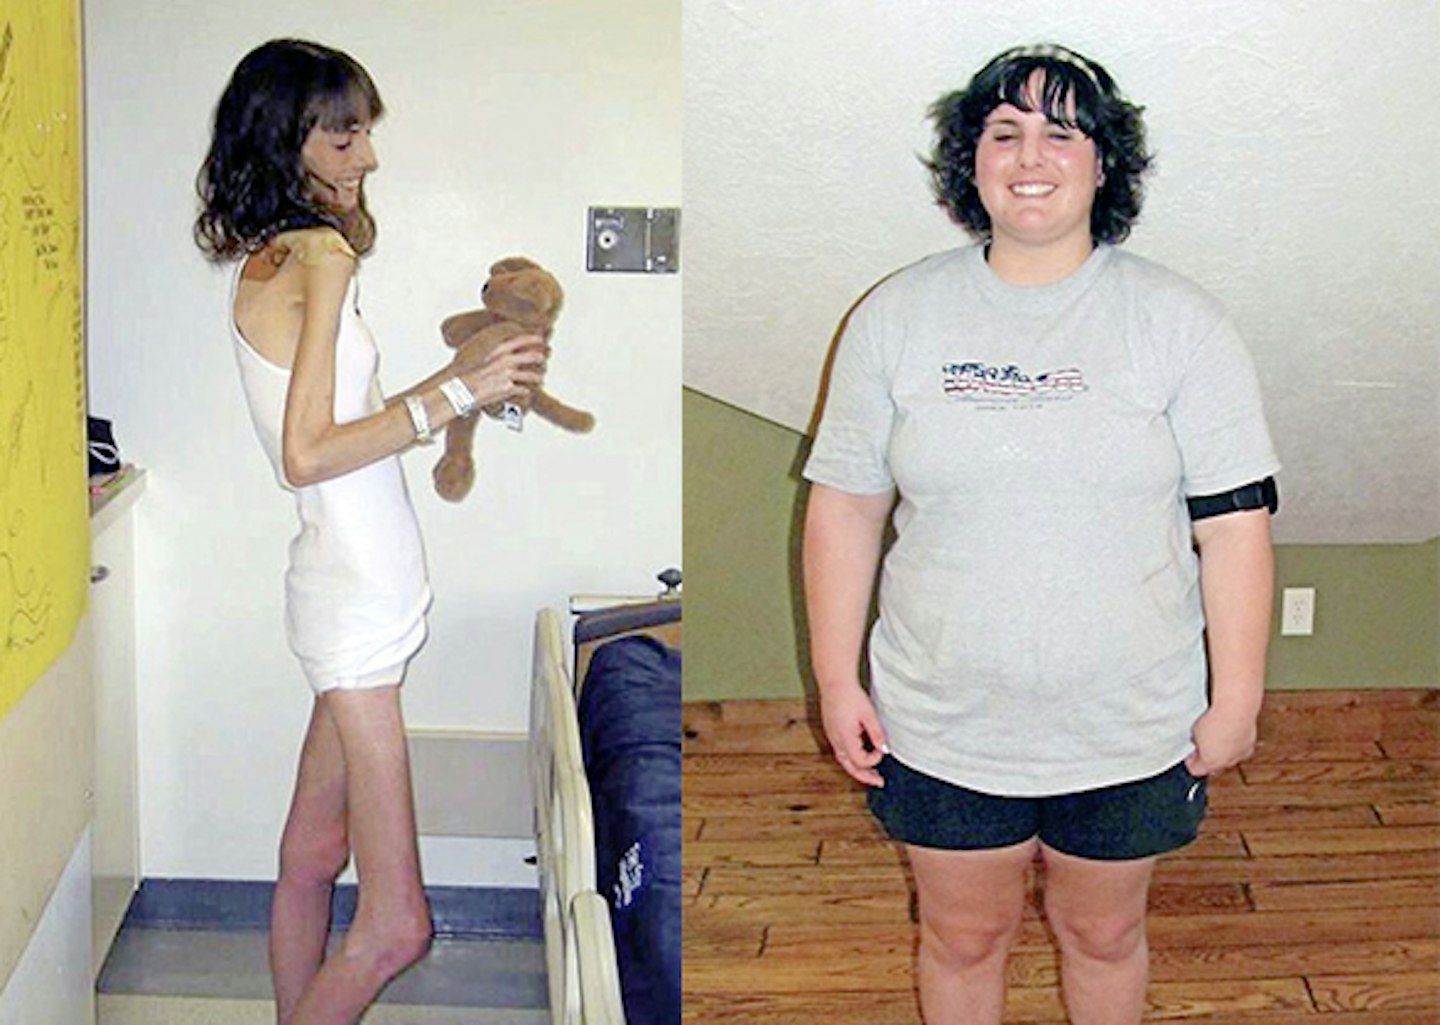 Brittany Burgunder is now a healthy size 10 